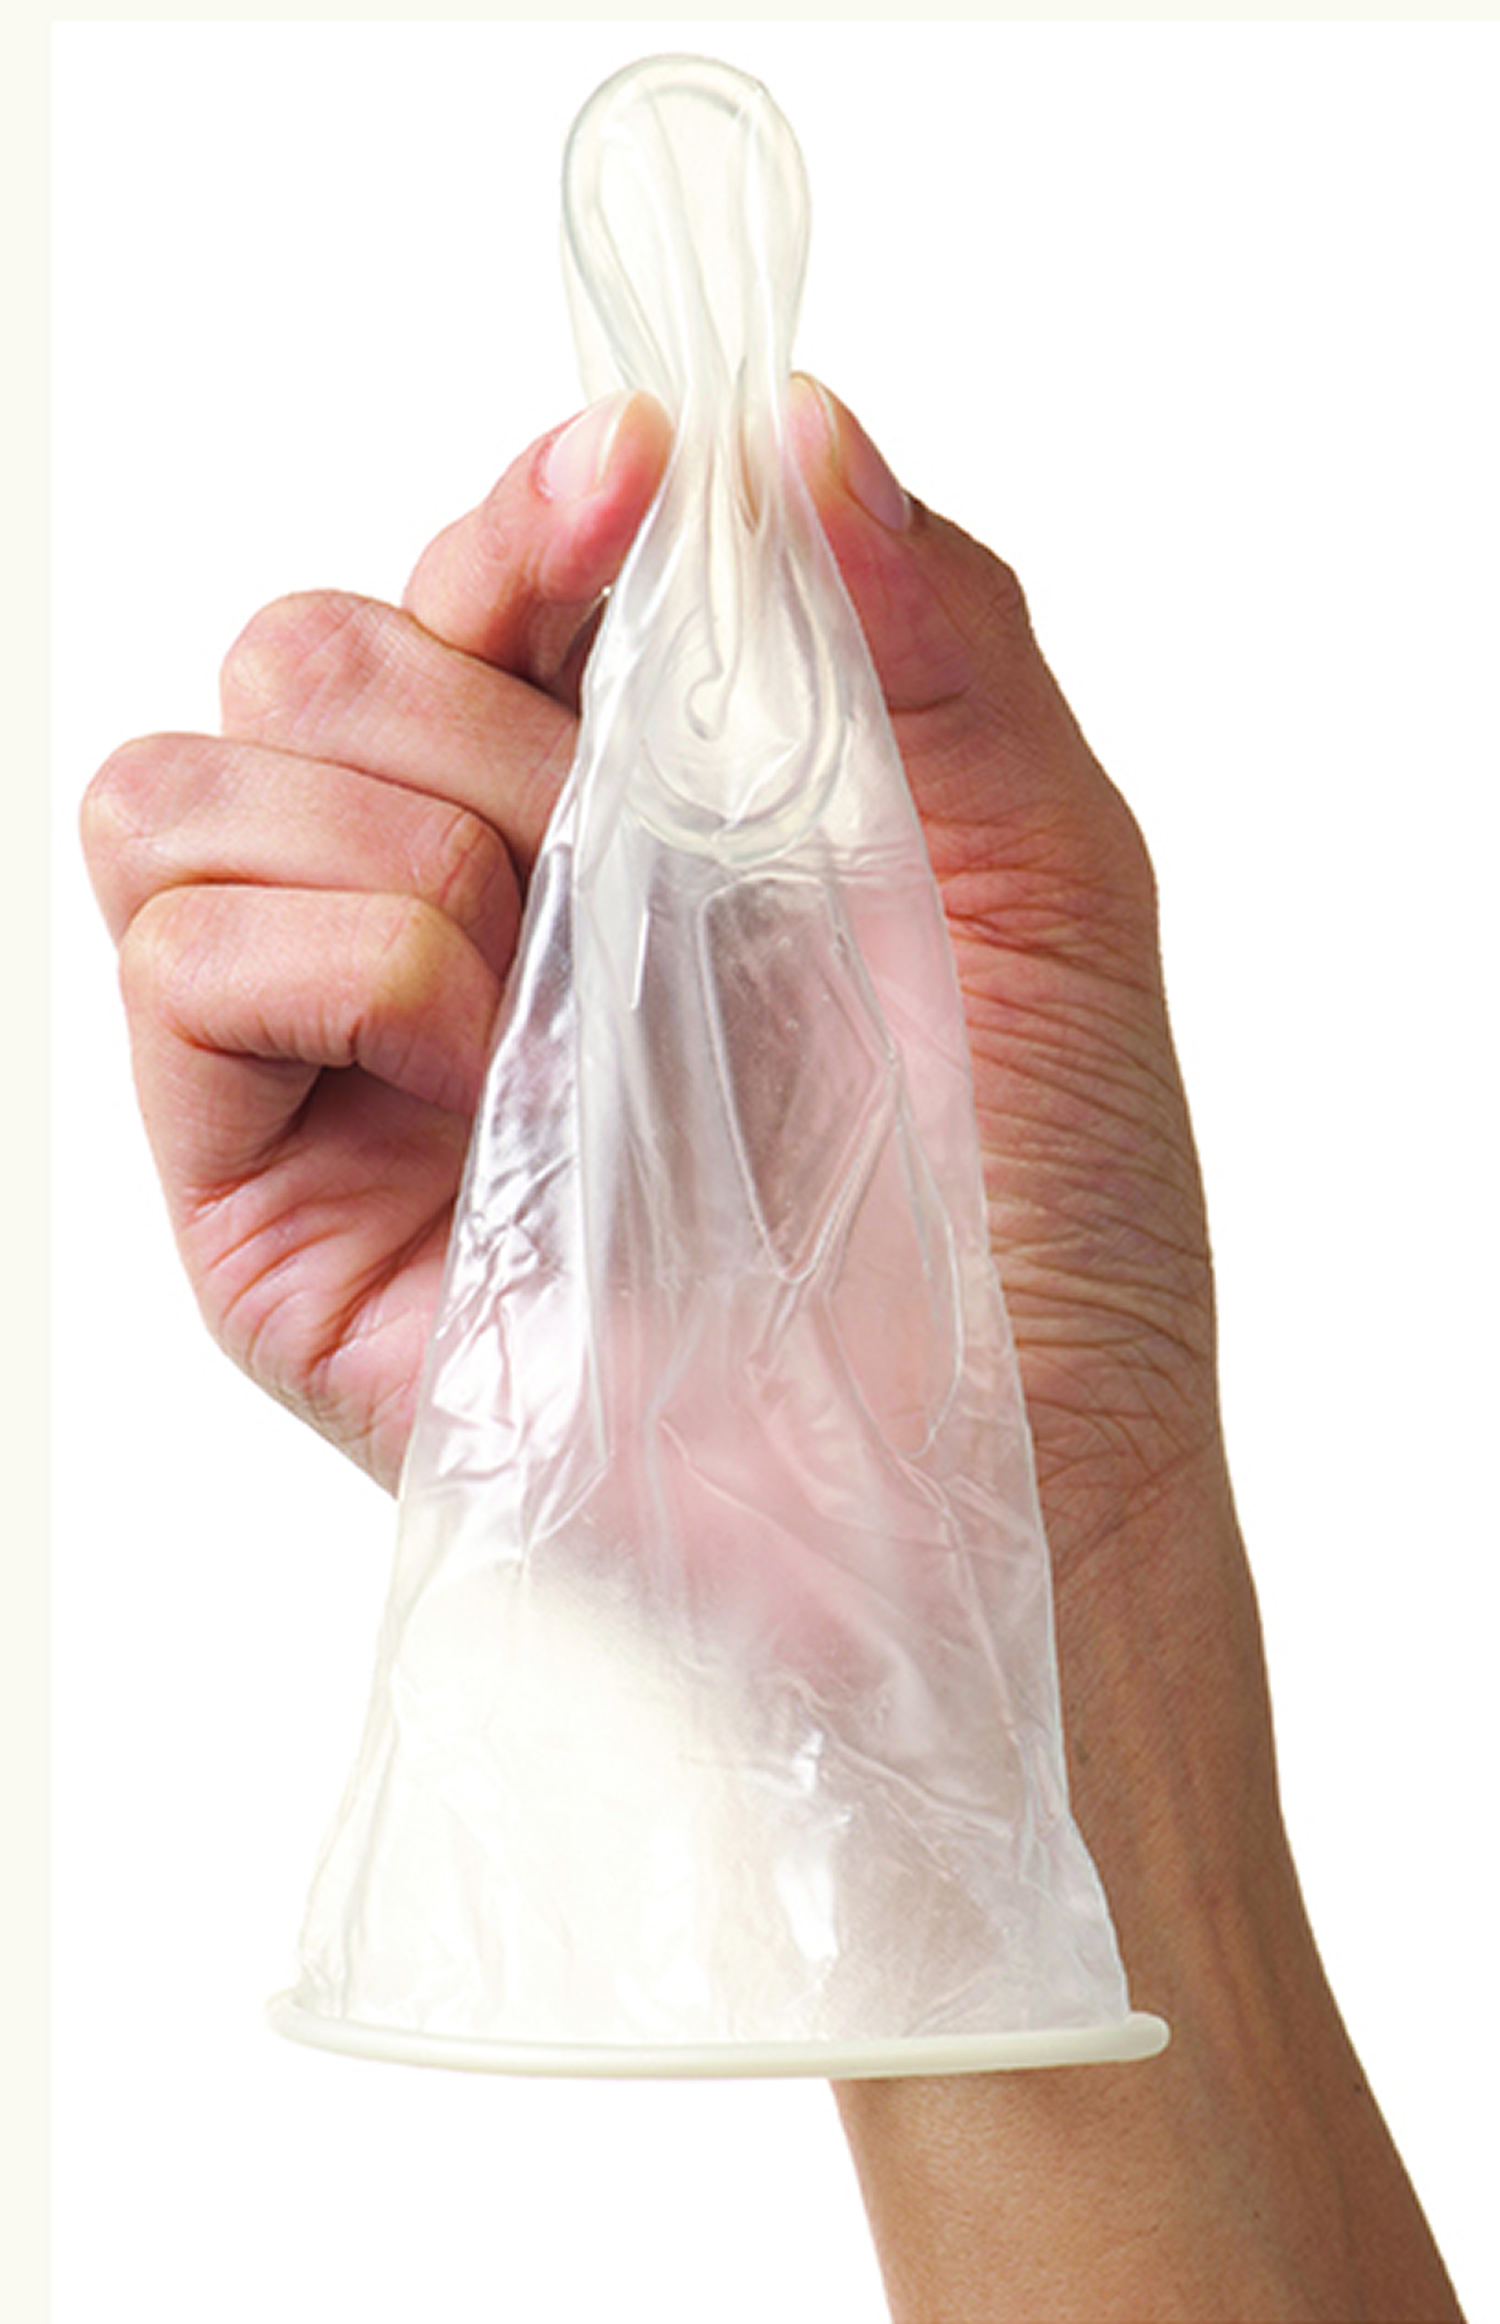 Female Condom How To Insert Female Condom Side Effects